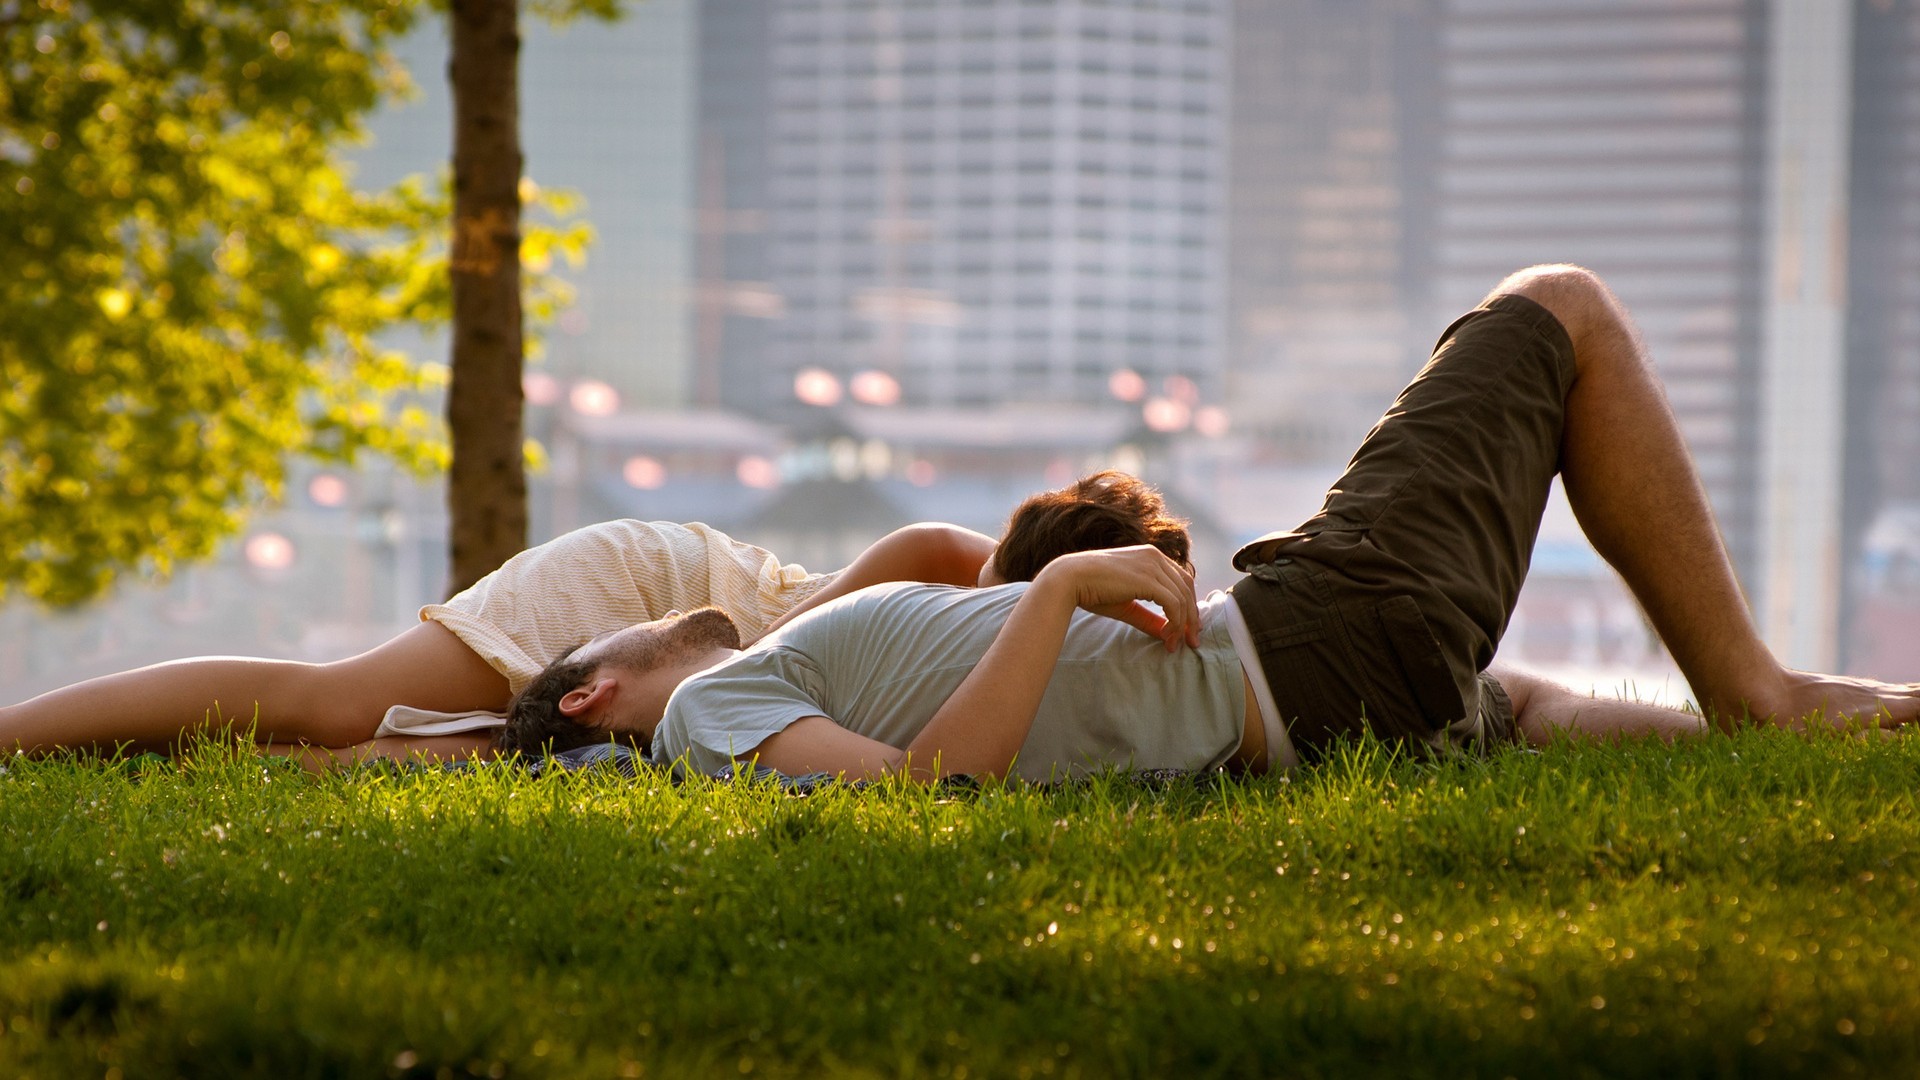 wallpaper related to love,people in nature,grass,romance,lawn,love